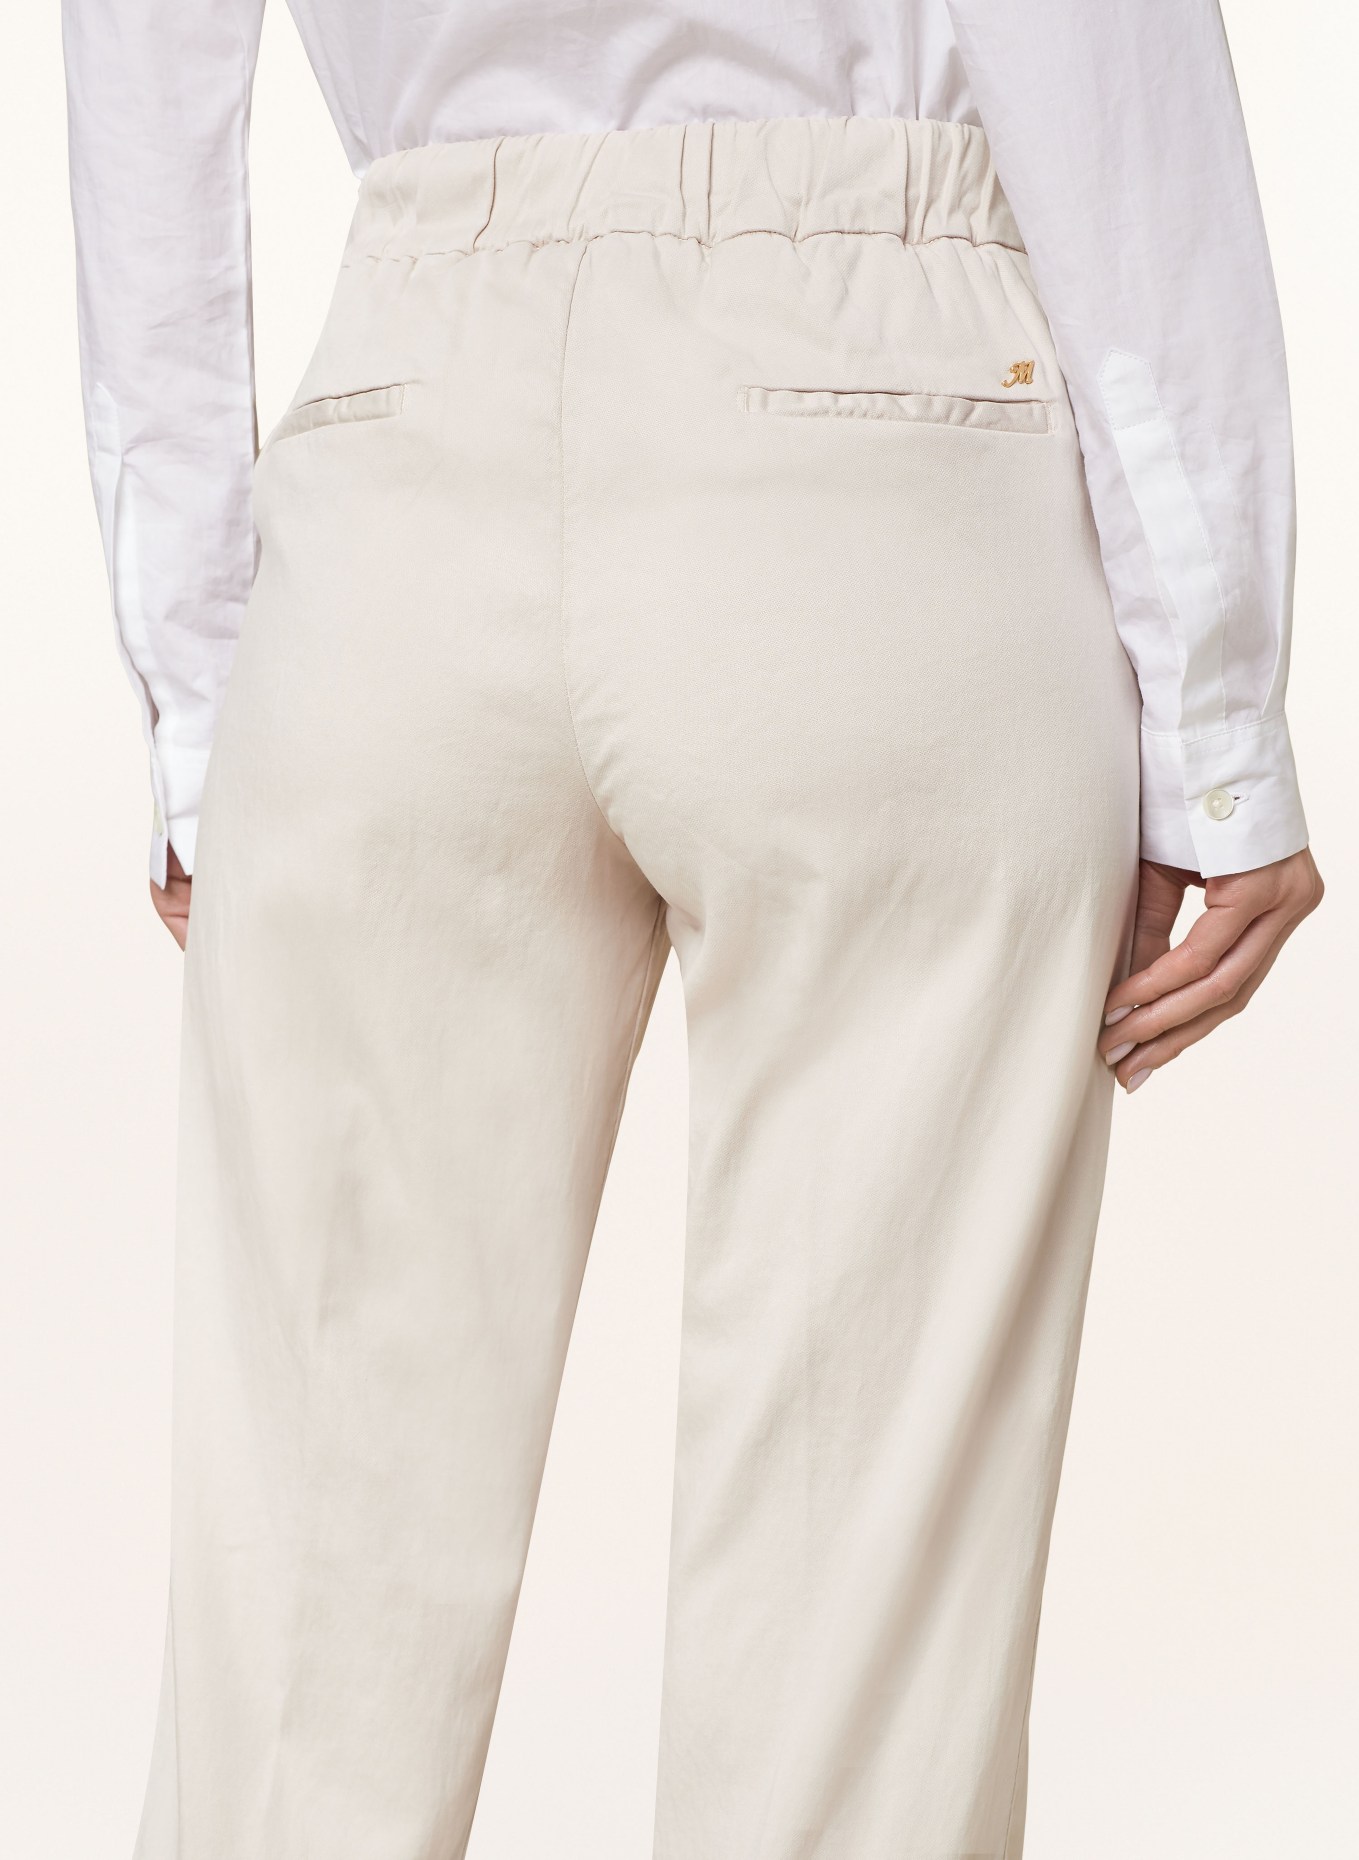 MASON'S Trousers EASY JOGGER in jogger style, Color: CREAM (Image 5)